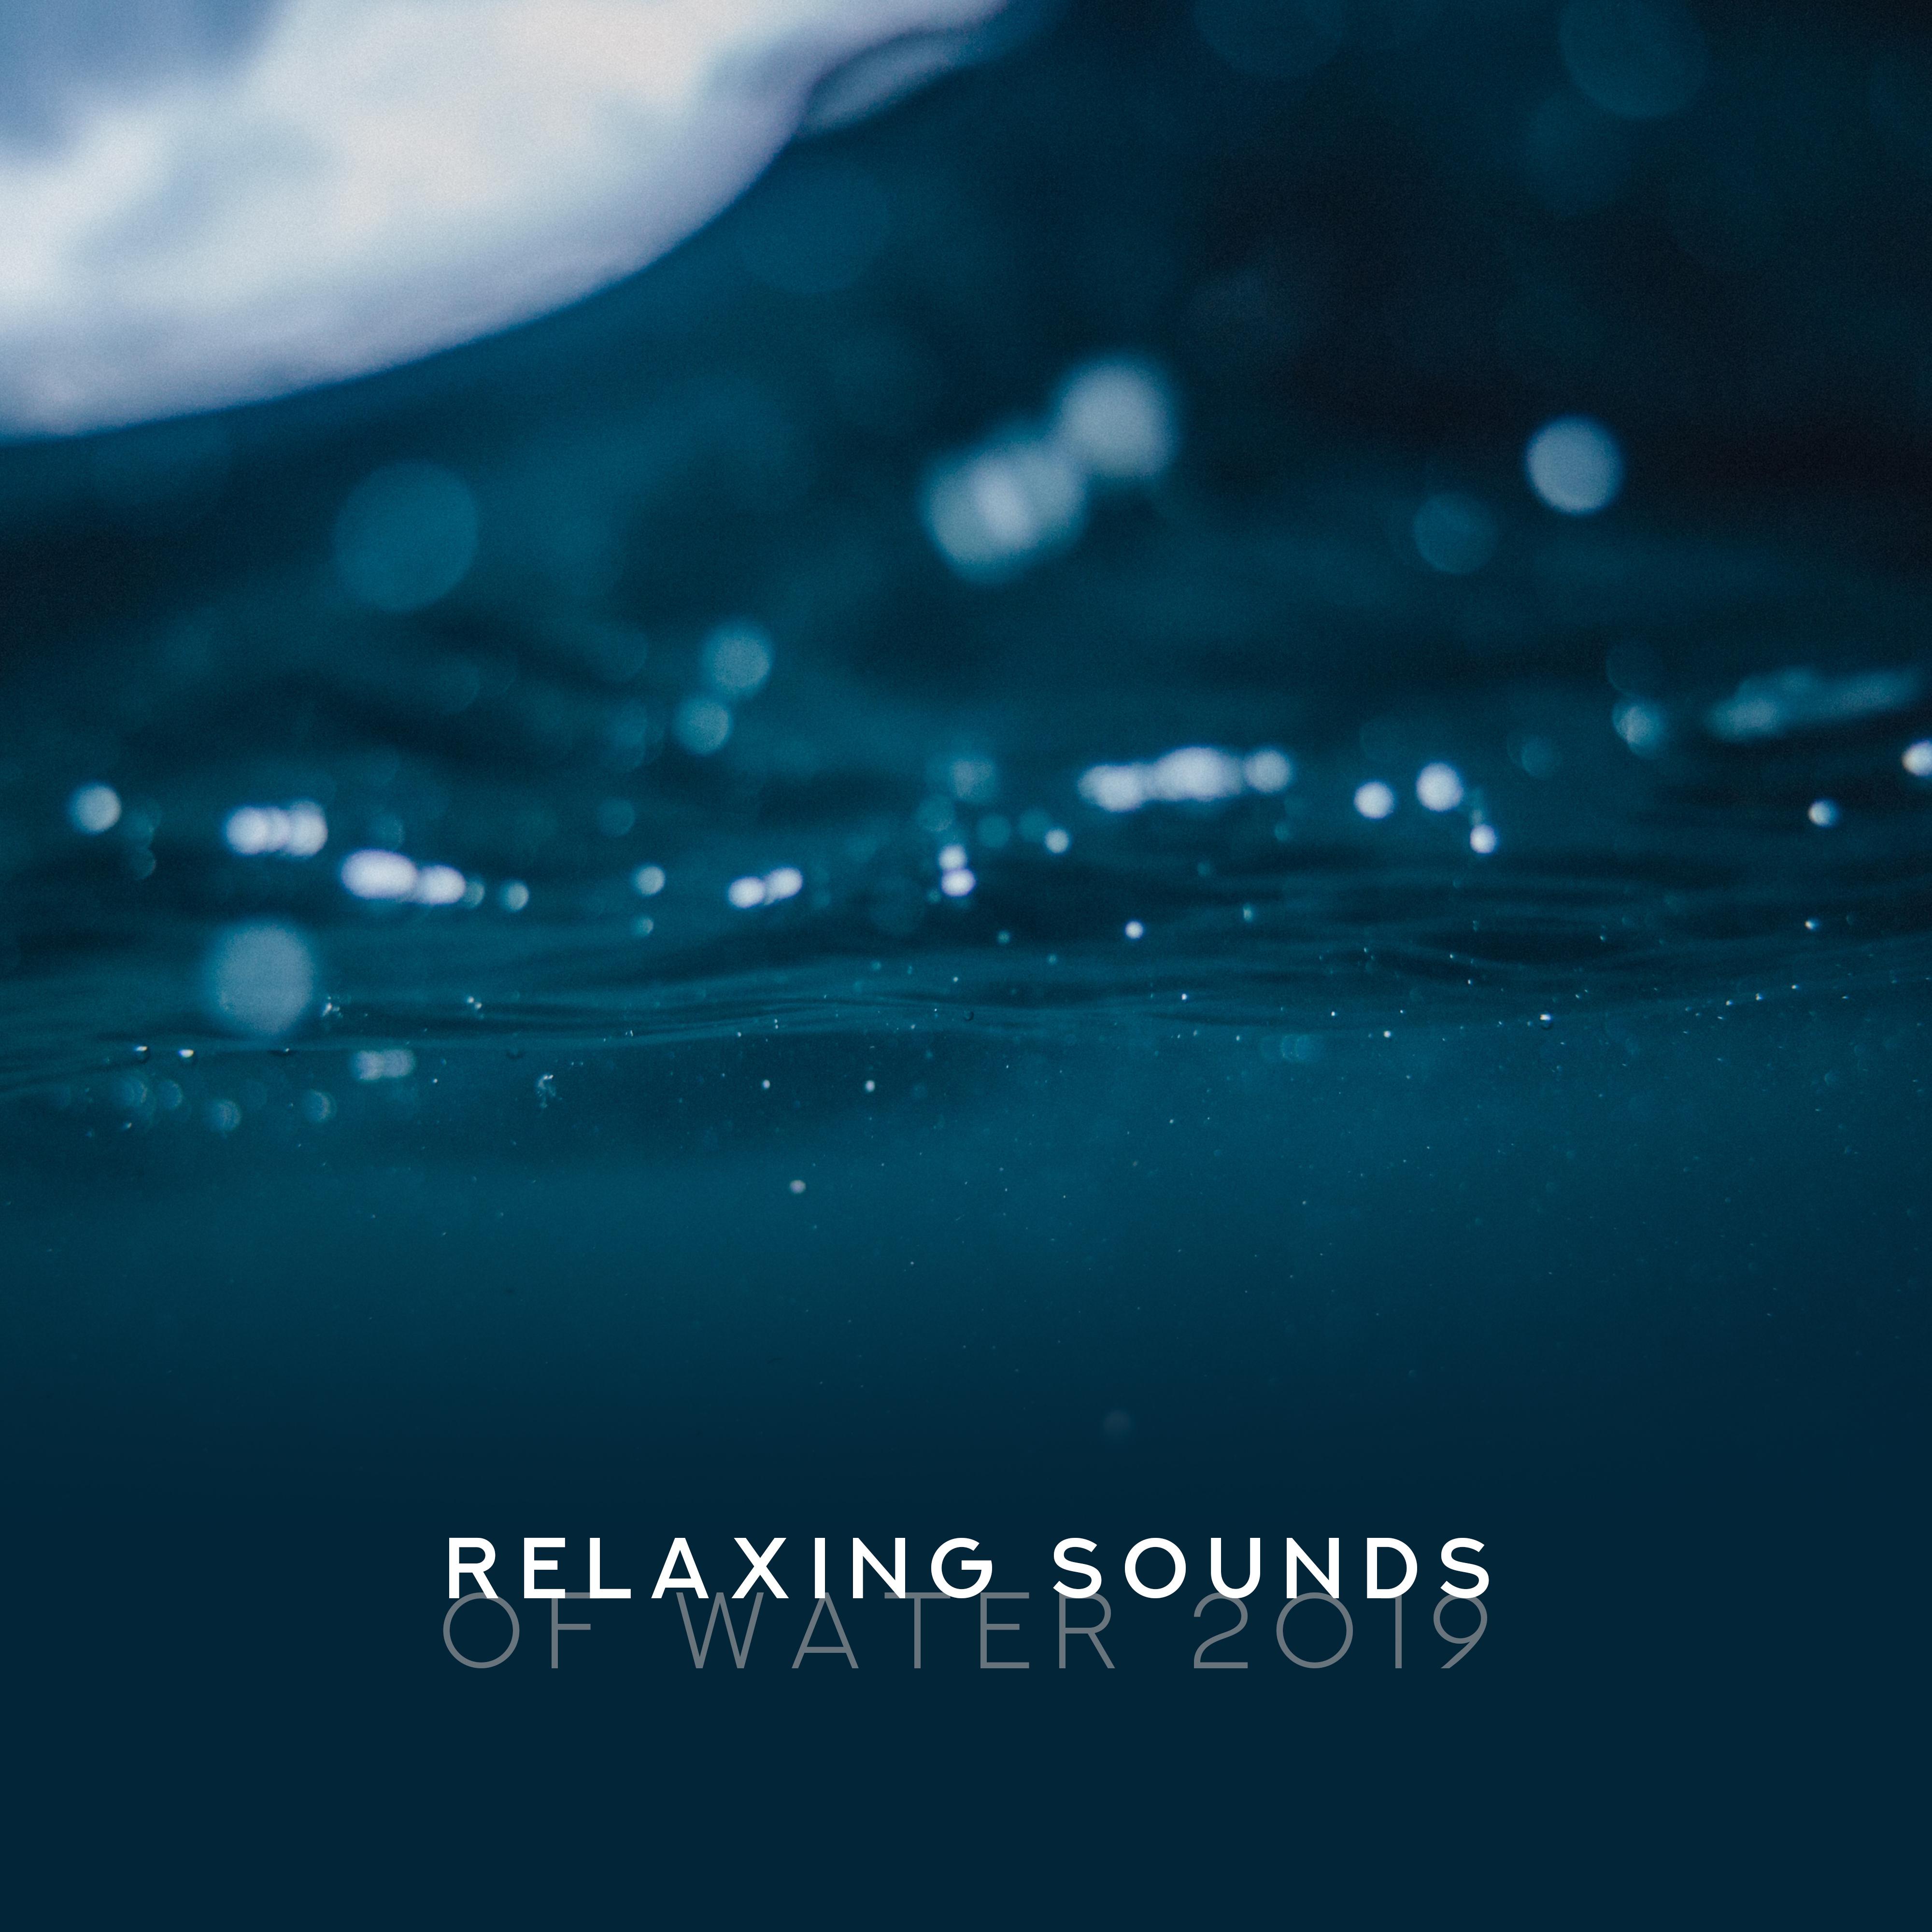 Relaxing Sounds of Water 2019: 15 New Age Soft Songs with Water Noises for Perfect Relaxation, Total Calming Down, Better Sleep, Spa Salon & Wellness